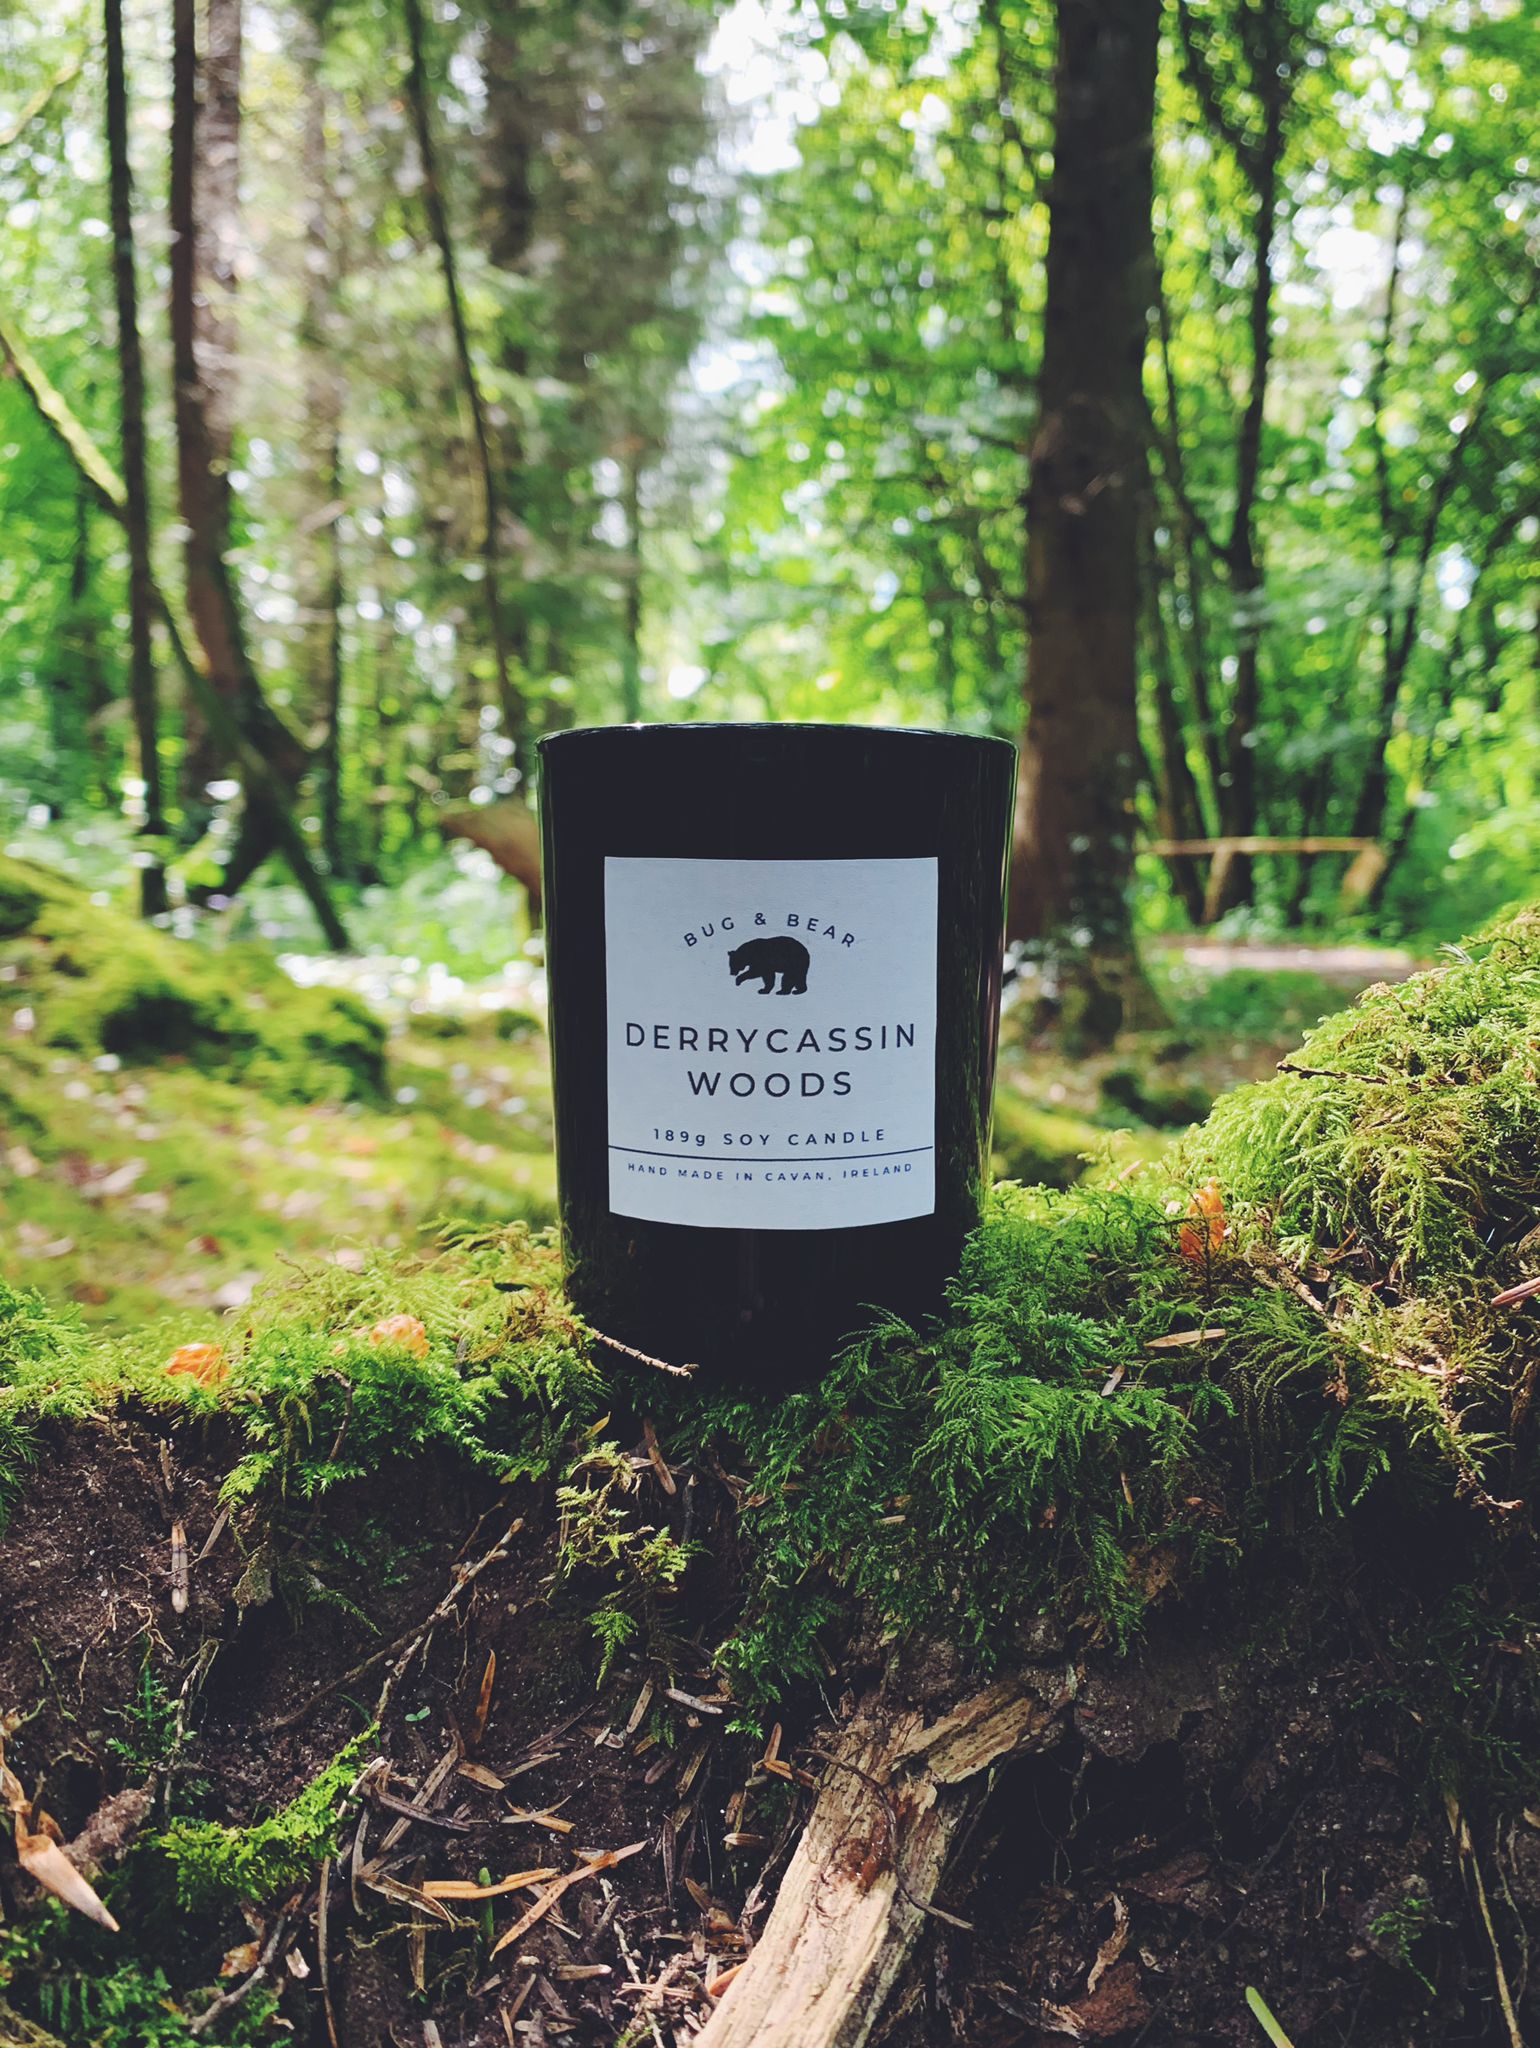 Bug & Bear Derrycassin Woods Scented Candle